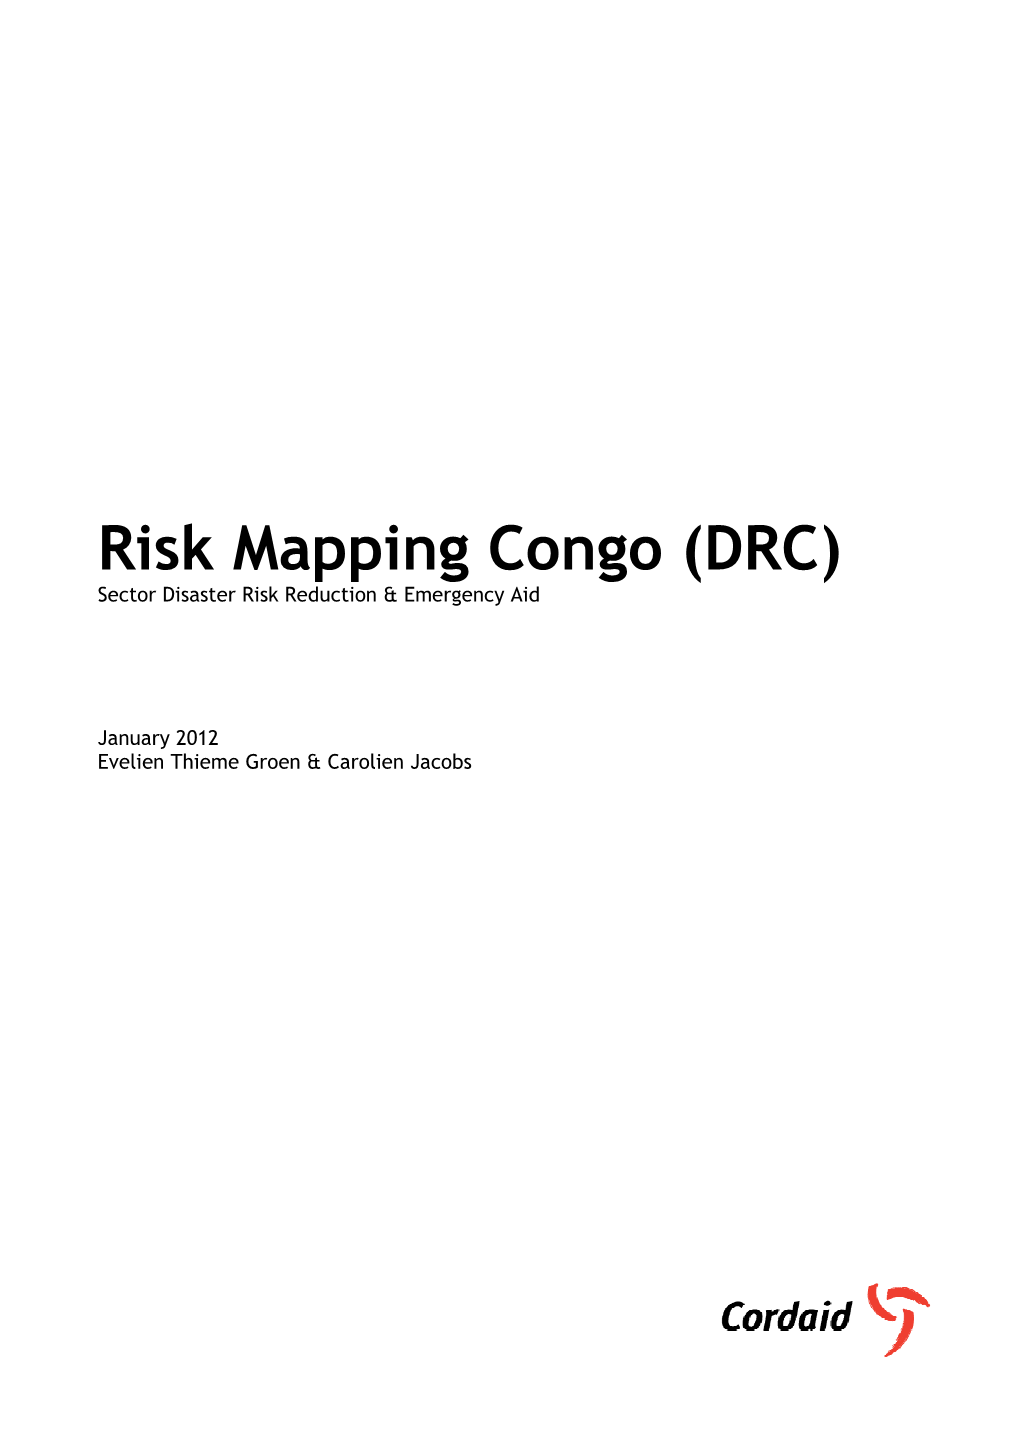 DRC Risk Mapping 20120130